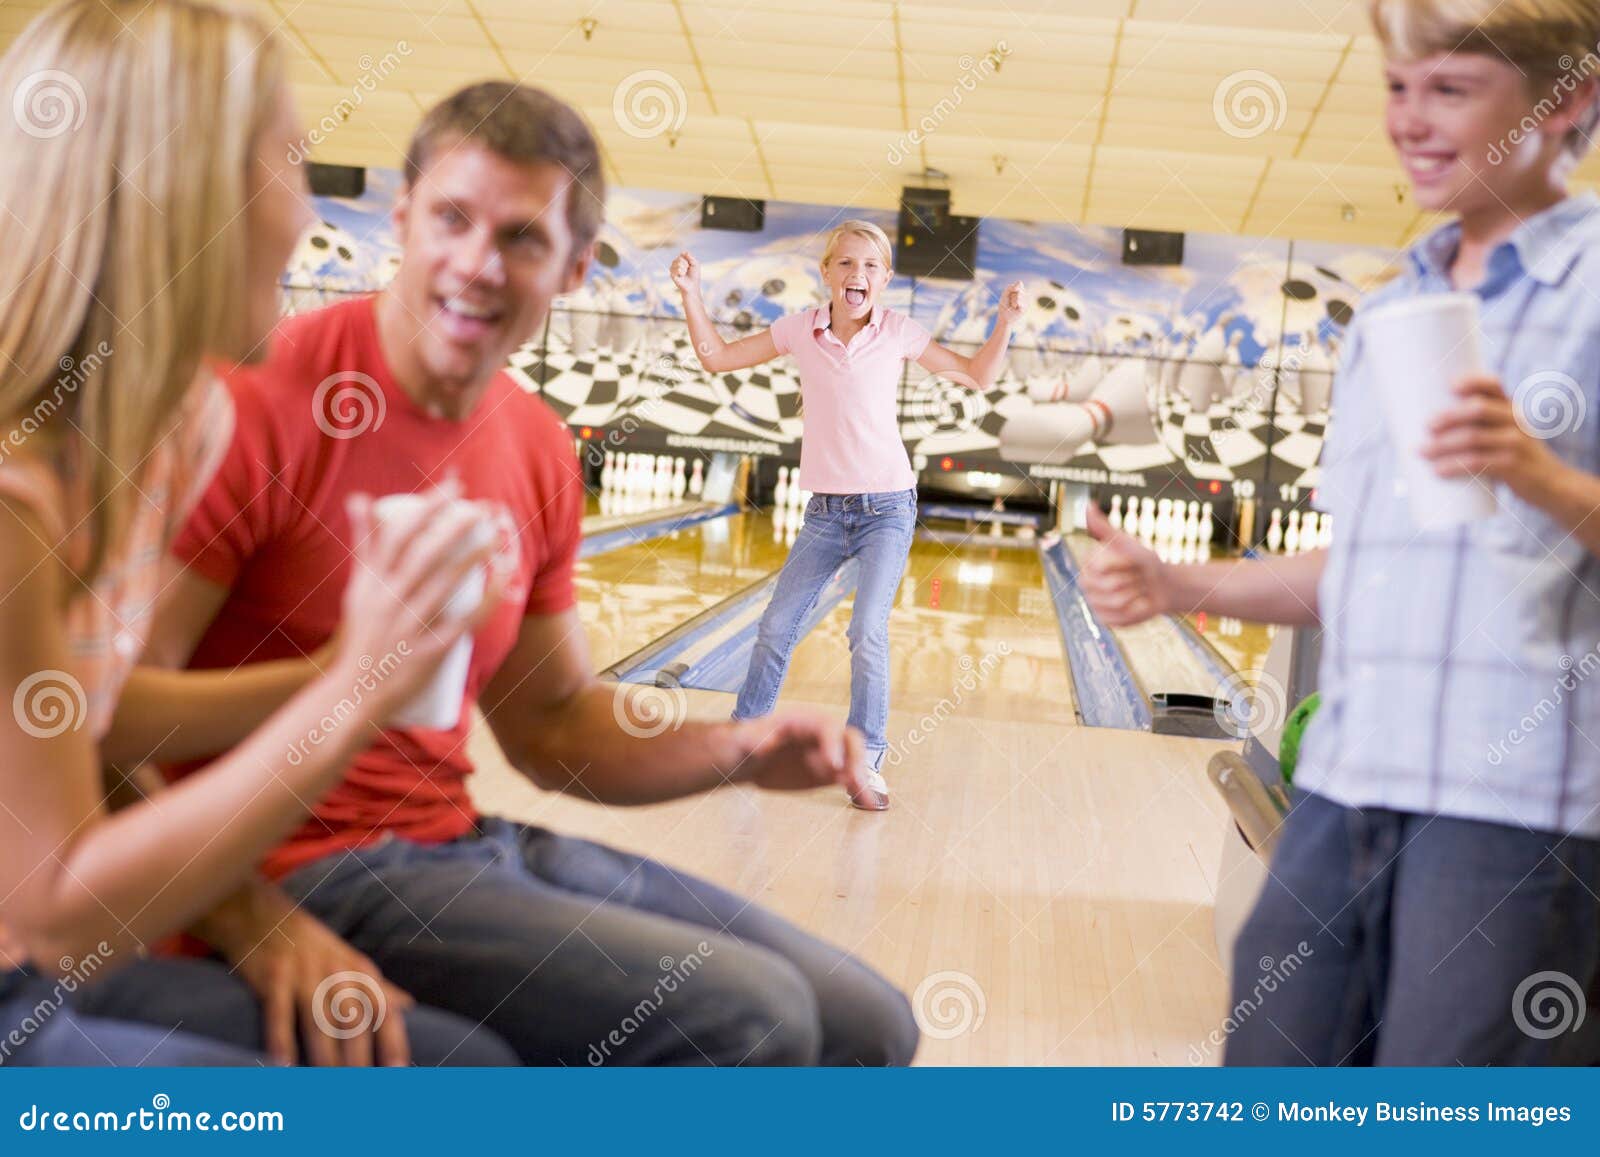 family bowling alley